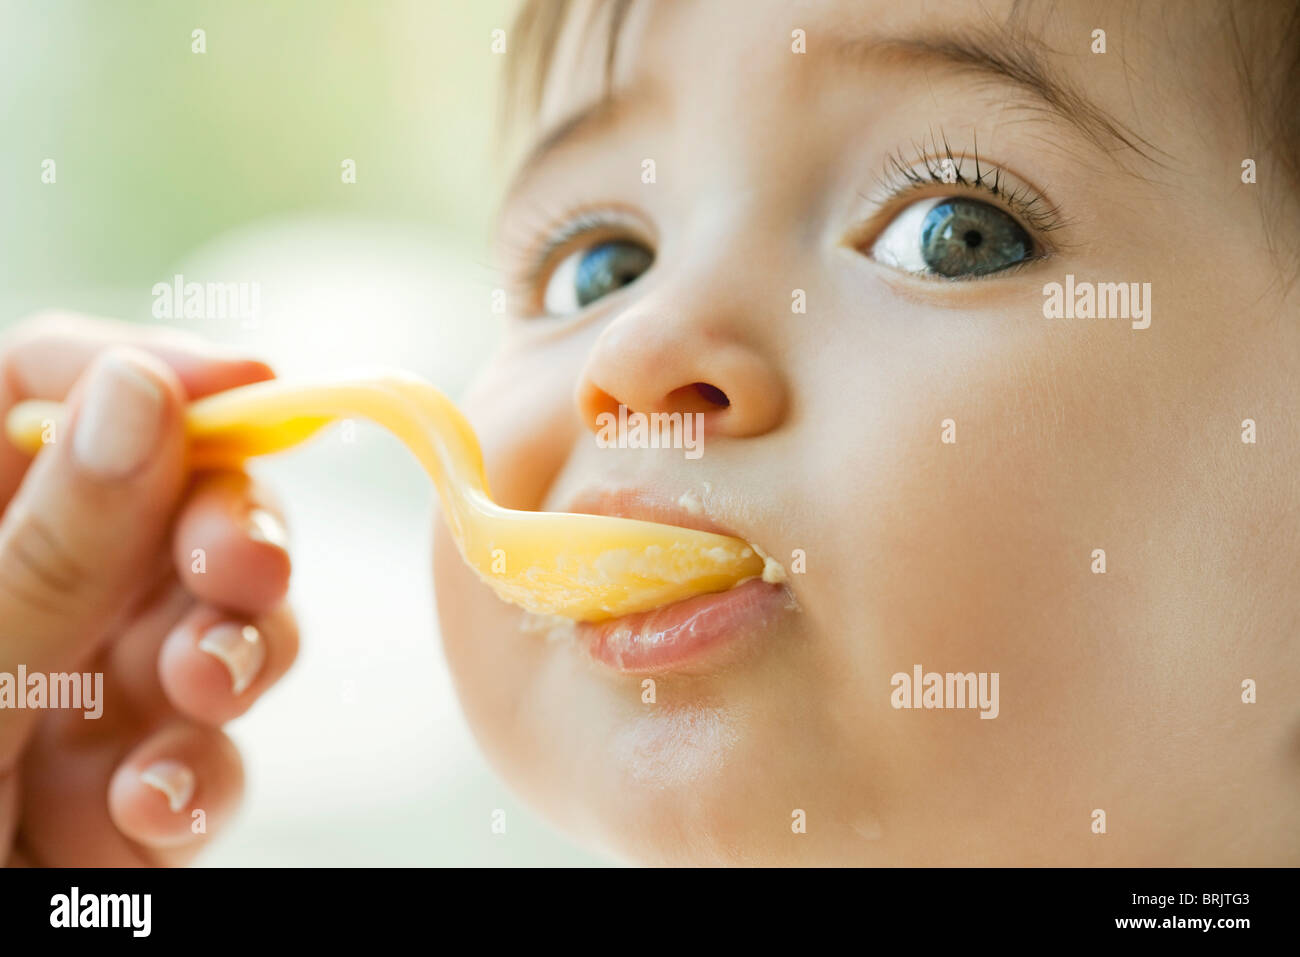 Infant being fed with a spoon Stock Photo